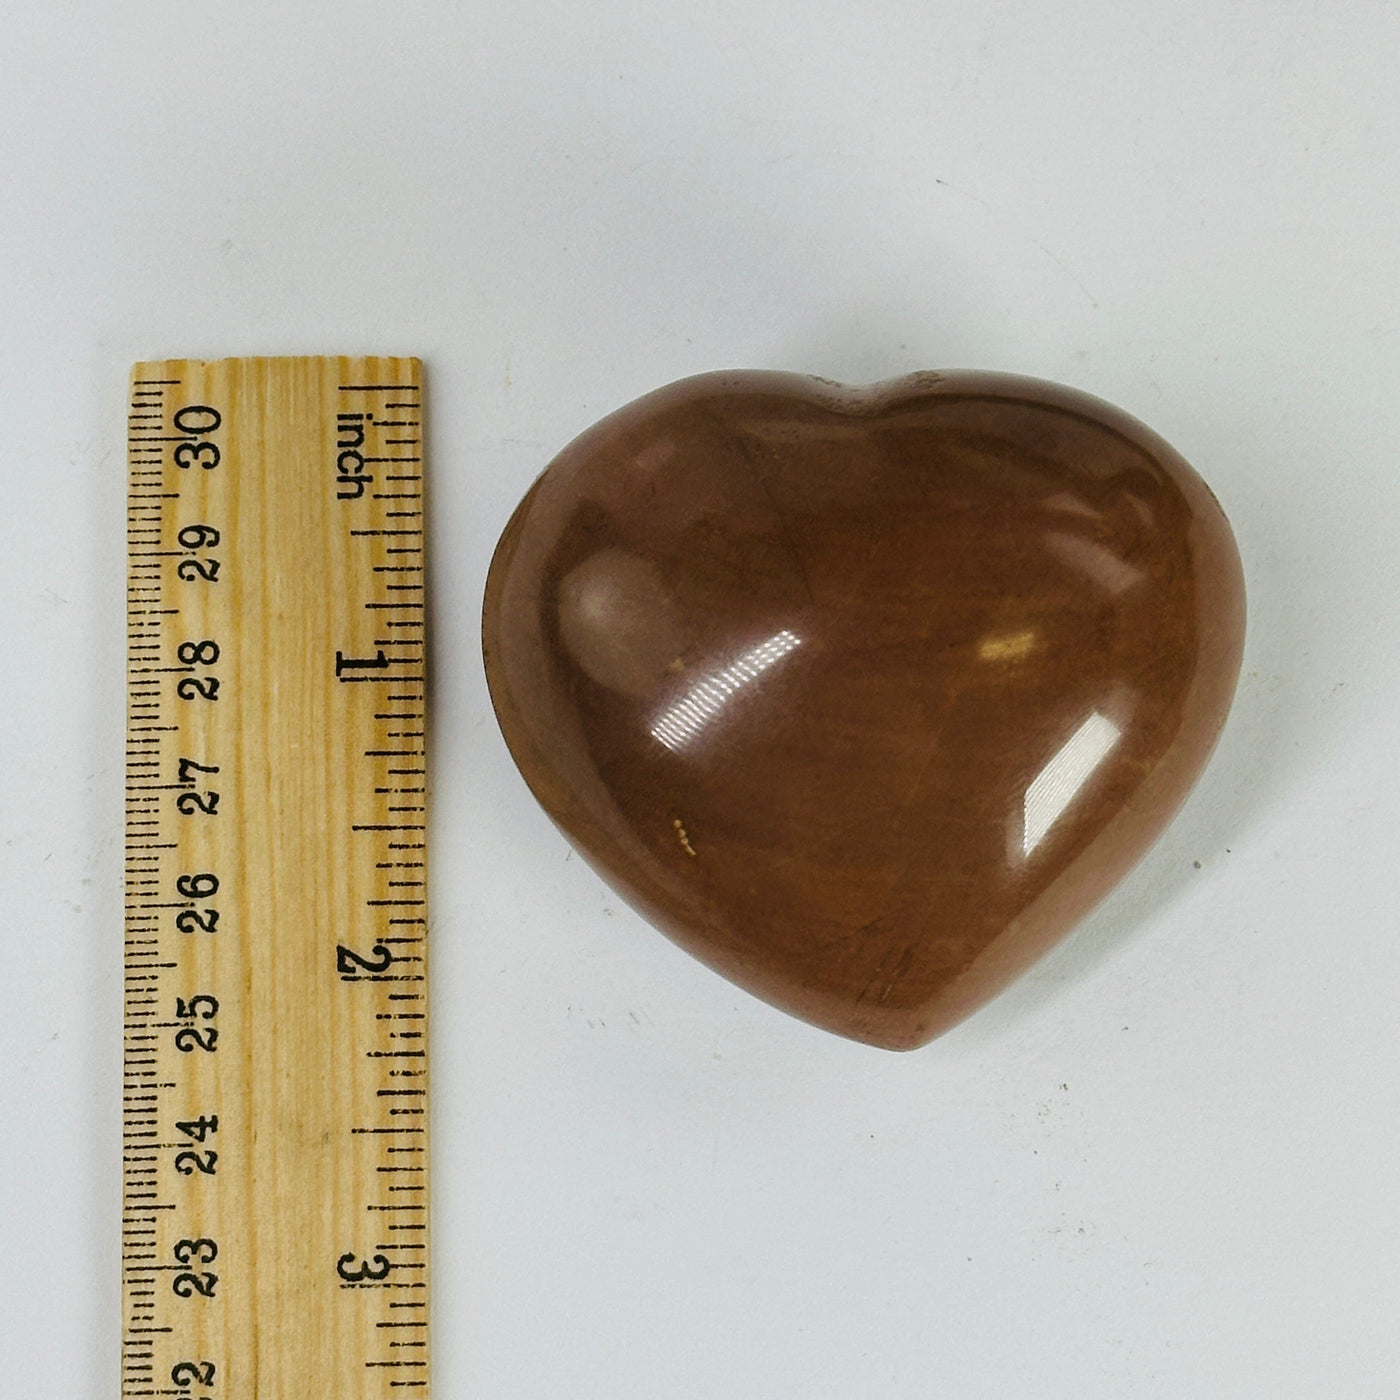 jasper heart next to a ruler for size reference